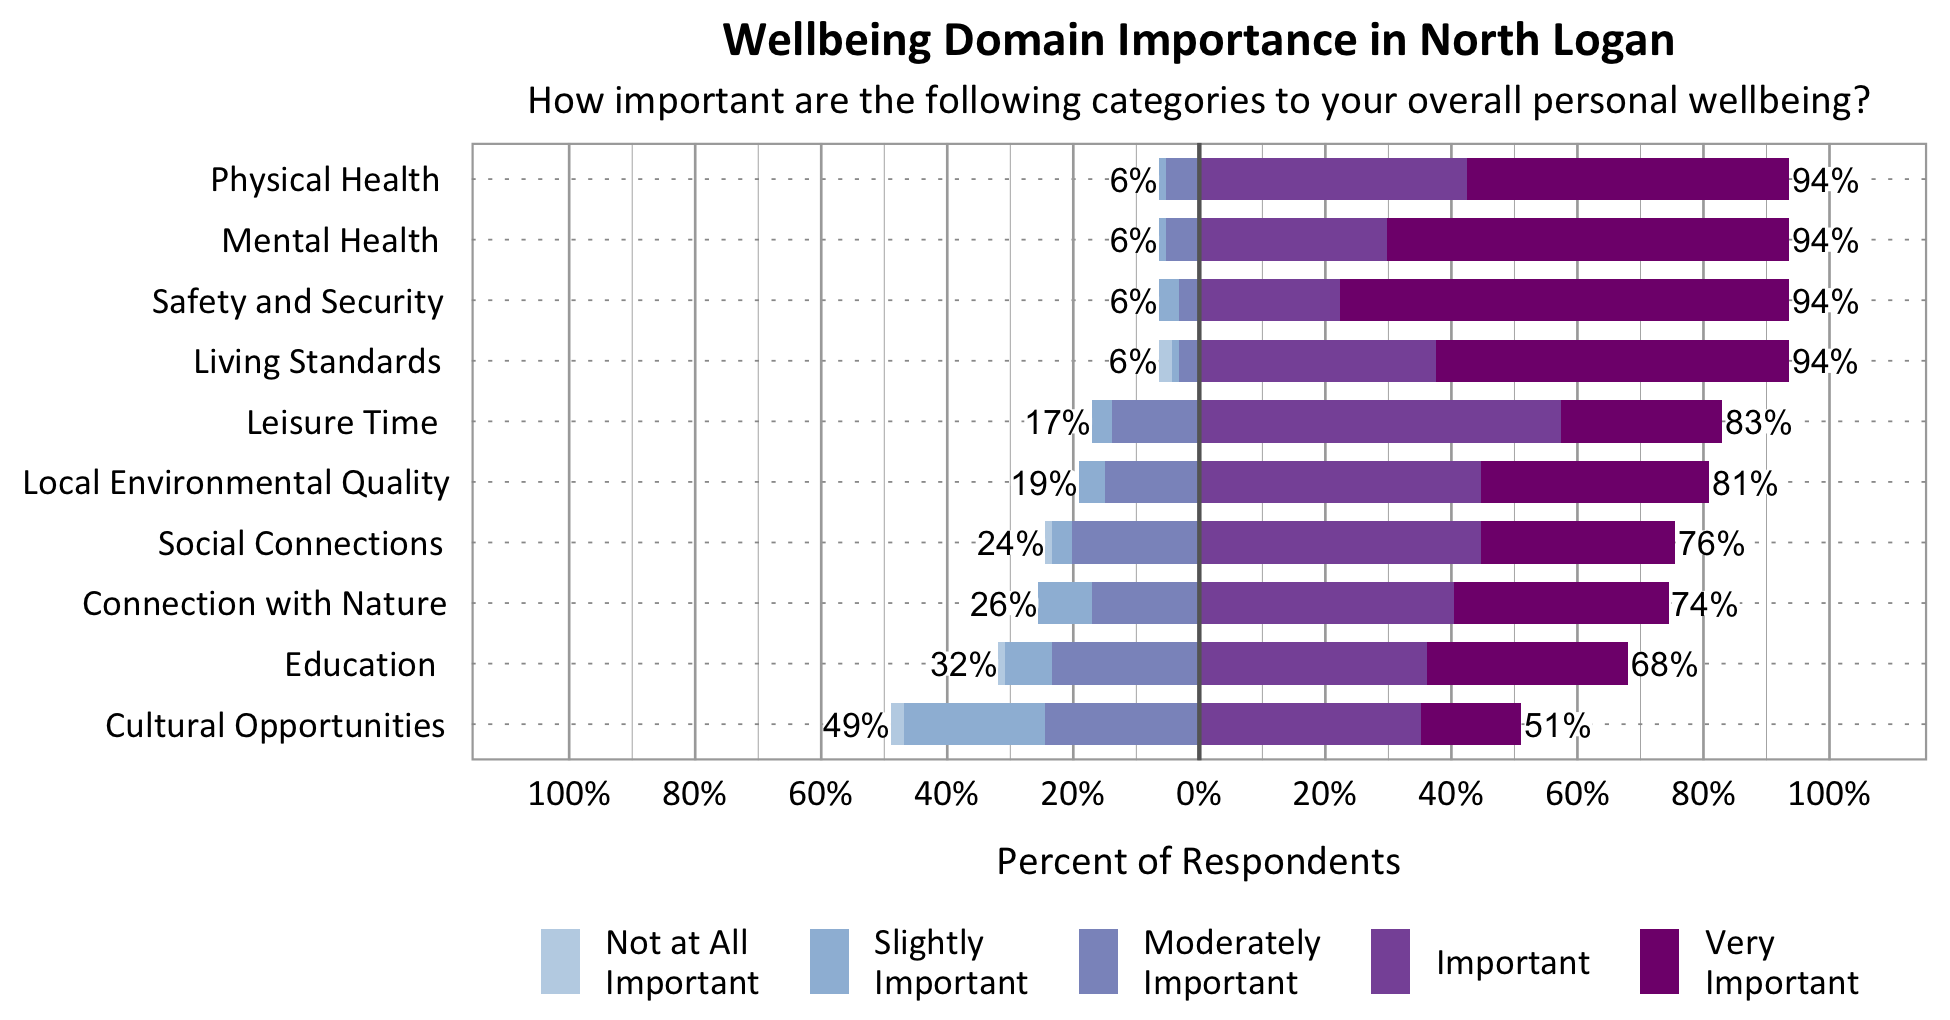 Likert Graph. Title: Wellbeing Domain Importance in North Logan. Subtitle: How important are the following categories to your overall personal wellbeing? Physical Health - 6% of respondents rated as not at all important, slightly important, or moderately important while 94% rated as important or very important; Category: Safety and Security 6% of respondents rated as not at all important, slightly important, or moderately important while 94% rated as important or very important; Category: Mental Health - 6% of respondents rated as not at all important, slightly important, or moderately important while 94% rated as important or very important; Category: Living Standards - 6% of respondents rated as not at all important, slightly important, or moderately important while 94% rated as important or very important; Category: Local Environmental Quality - 19% of respondents rated as not at all important, slightly important, or moderately important while 81% of respondents rated as important or very important; Category: Leisure Time – 17% of respondents rated as not at all important, slightly important, or moderately important while 83% rated as important or very important; Category: Connection with Nature - 26% of respondents rated as not at all important, slightly important, or moderately important while 74% rated as important or very important; Category: Education - 32% of respondents rated as not at all important, slightly important, or moderately important while 68% rated as important or very important; Category: Social Connections - 24% rated as not at all important, slightly important, or moderately important while 76% rated as important or very important; Category: Cultural Opportunities - 49% rated as not at all important, slightly important, or moderately important while 51% rated as important or very important.